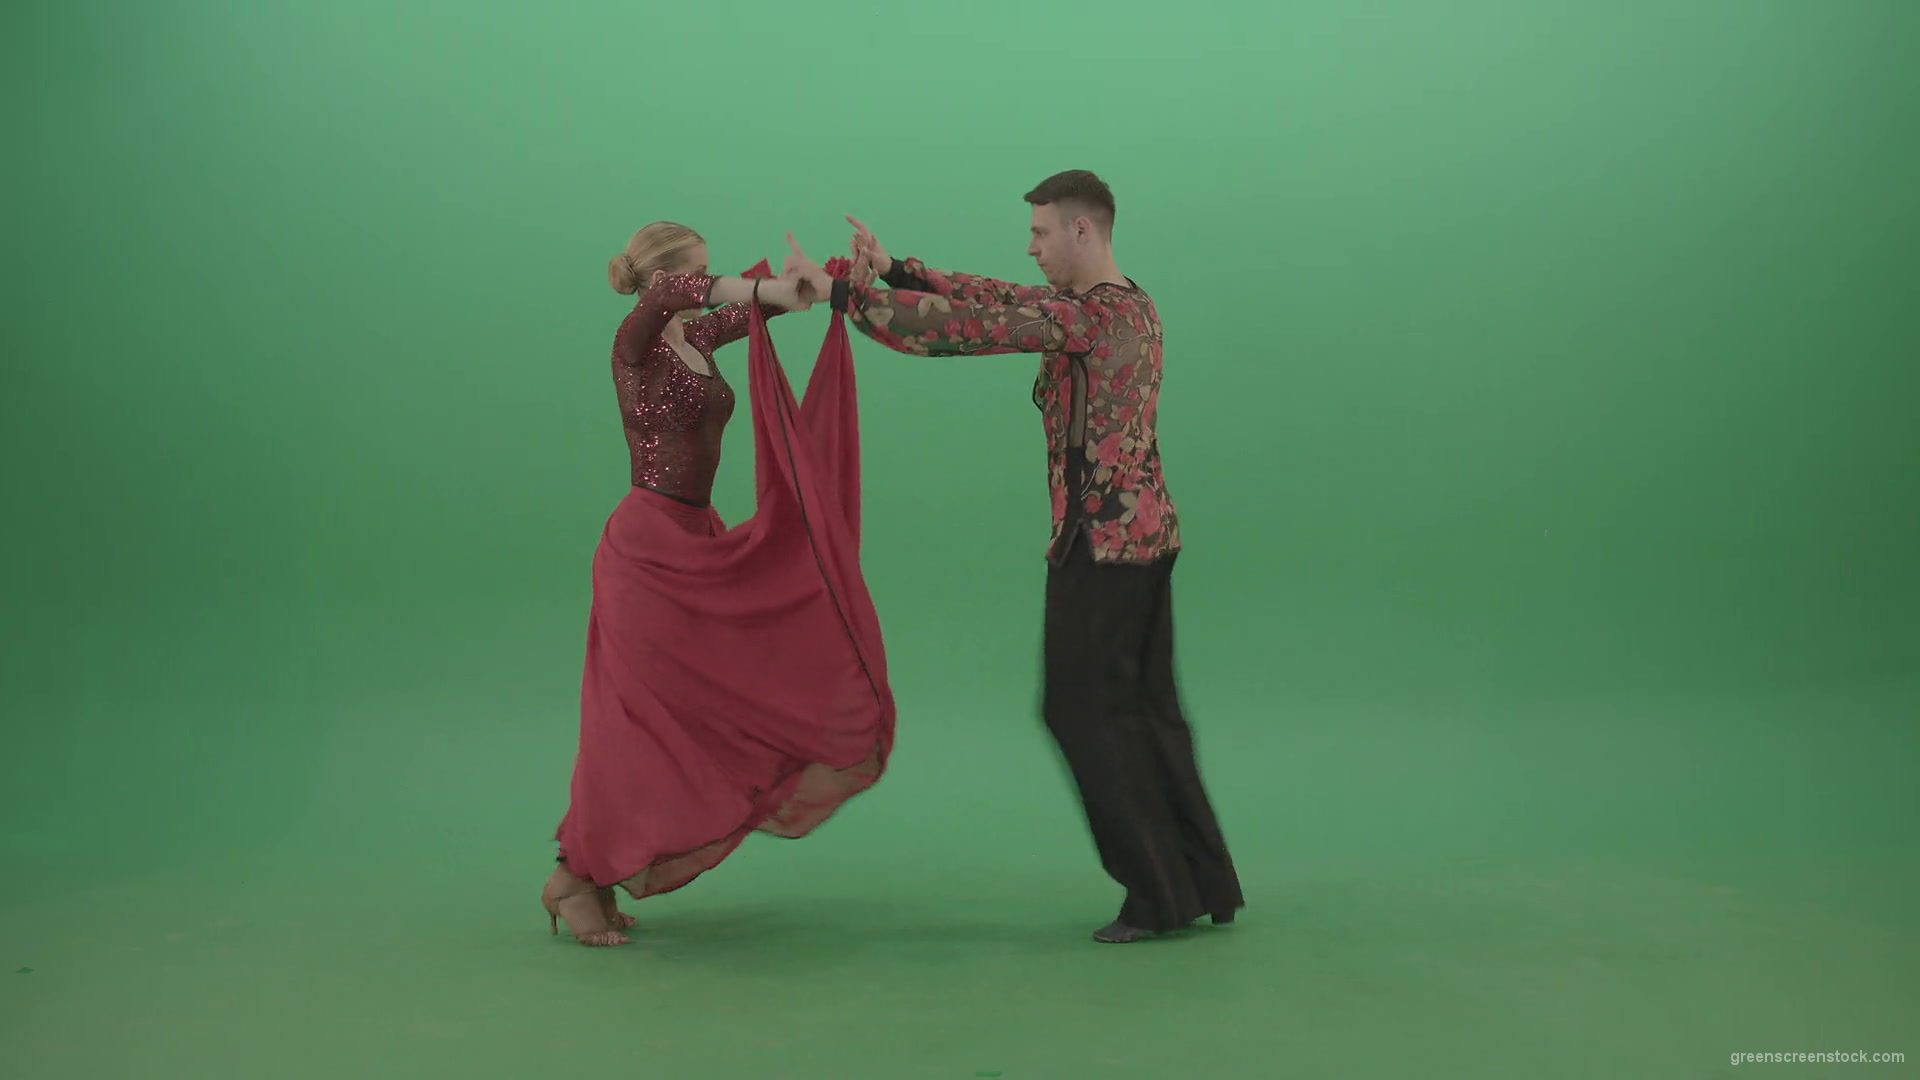 Passion-Couple-dancing-Rumba-Ballroom-dance-and-clapping-in-hands-isolated-on-green-screen-4K-Video-Footage-1920_007 Green Screen Stock